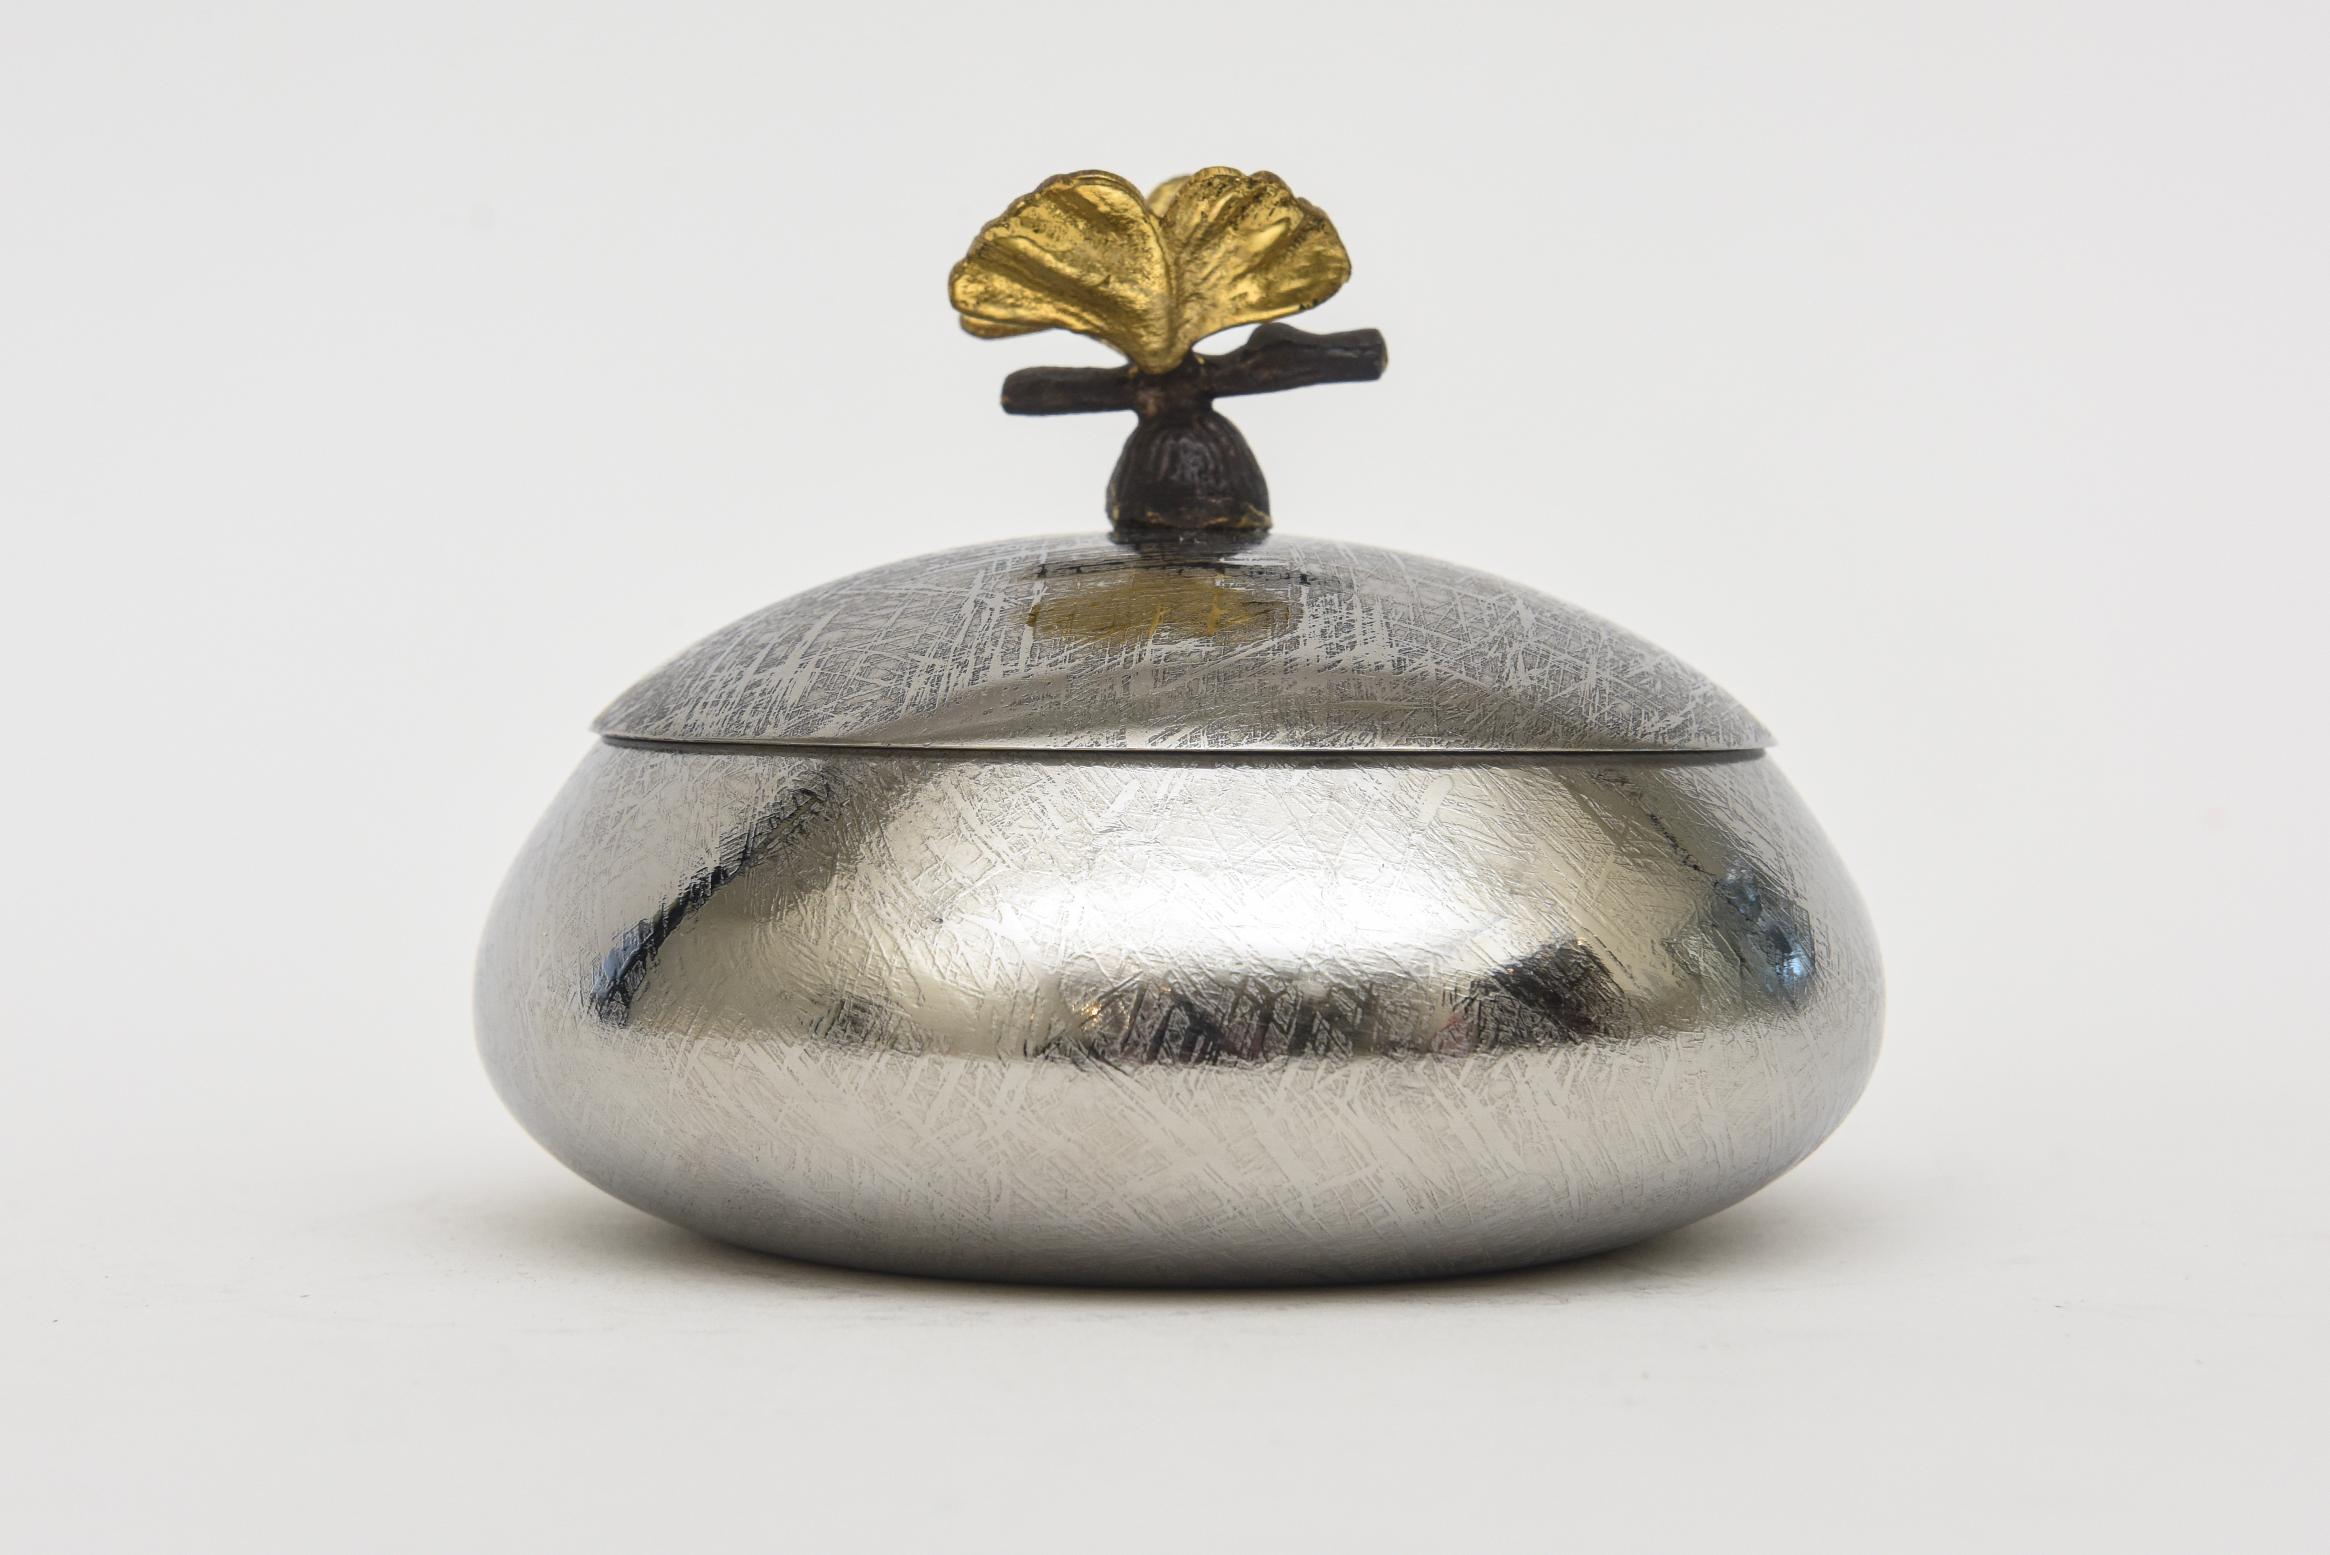 This lovely small round 2 part box is an early piece of the designs of MIchael Aram's work from the early 90's.  It is a tooled design silver metal on the top of the box with a blackened metal and brass flower top. The interior is a cream enamel